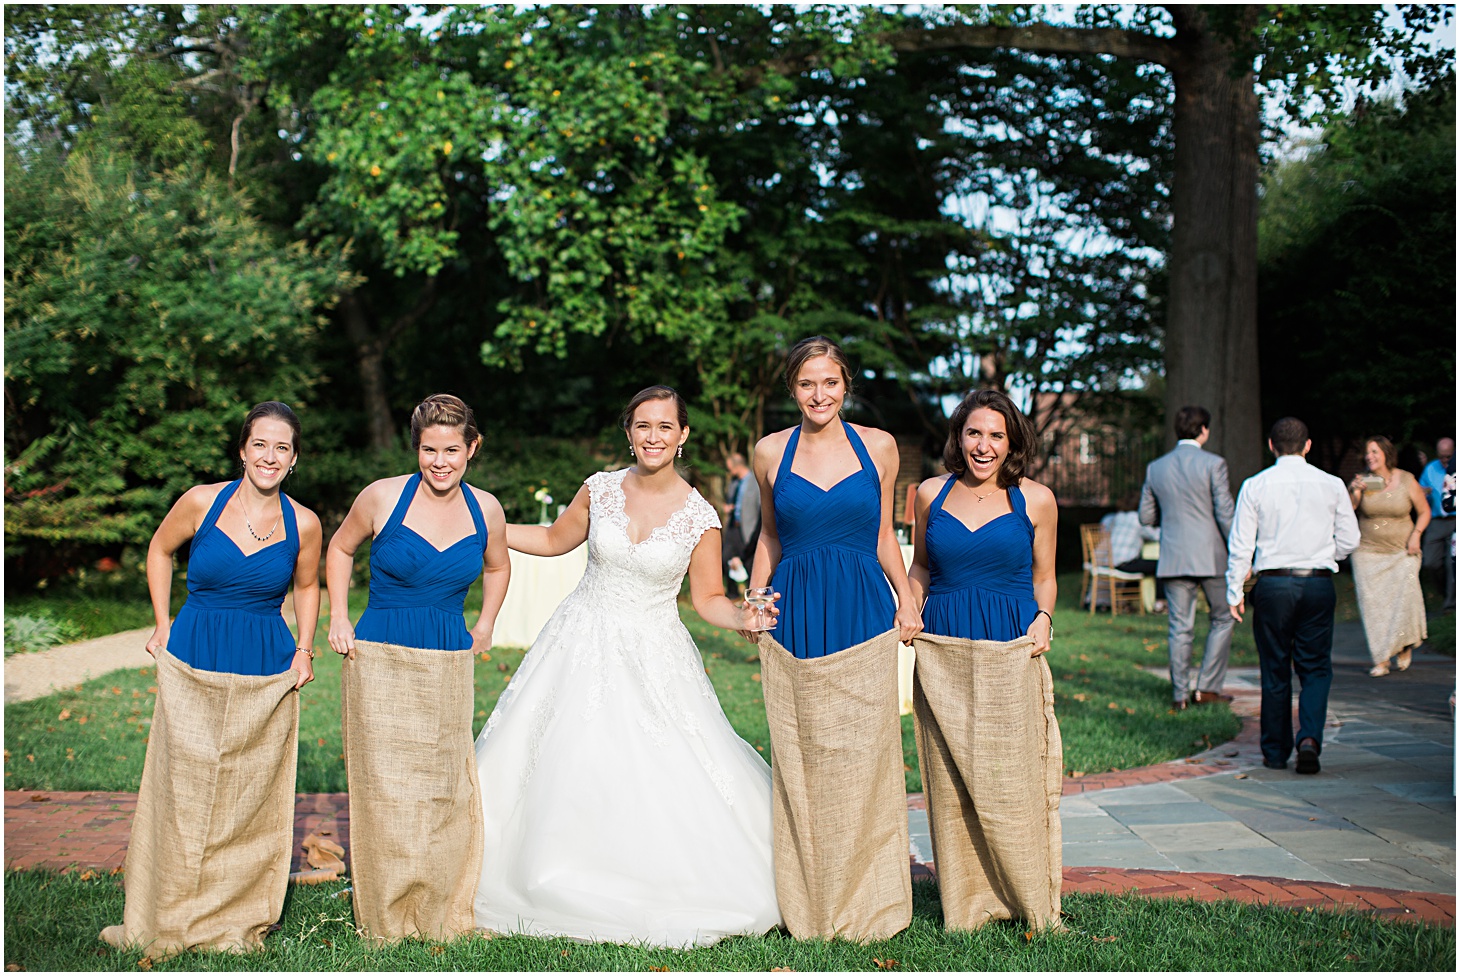 Bridesmaids Sack Race | Vintage-Inspired Dumbarton House Wedding in Georgetown by Sarah Bradshaw Photography